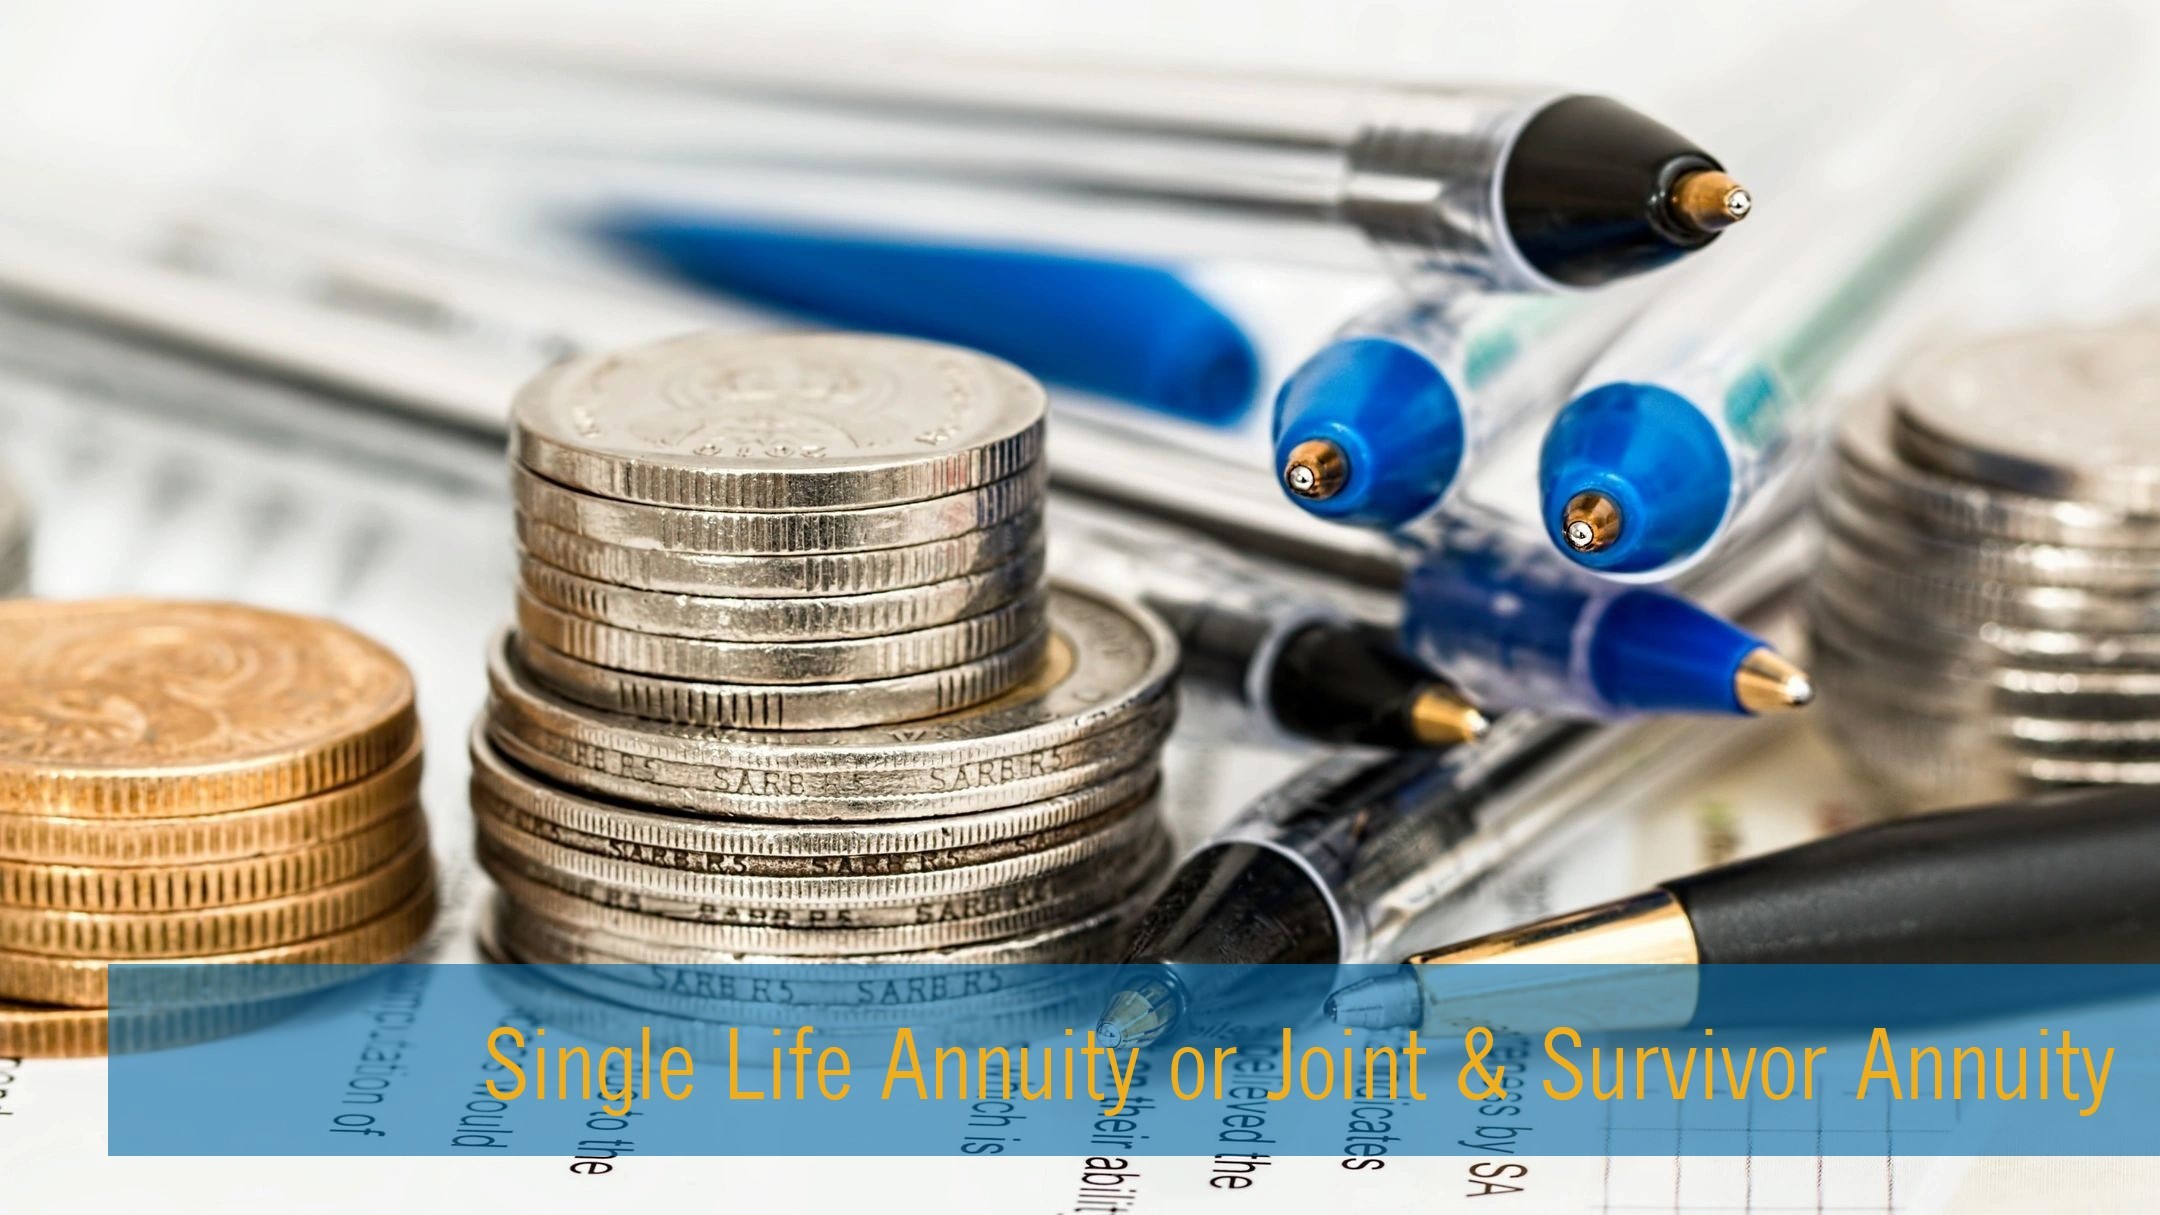 Single vs Joint Life Annuity: Which One is Better?